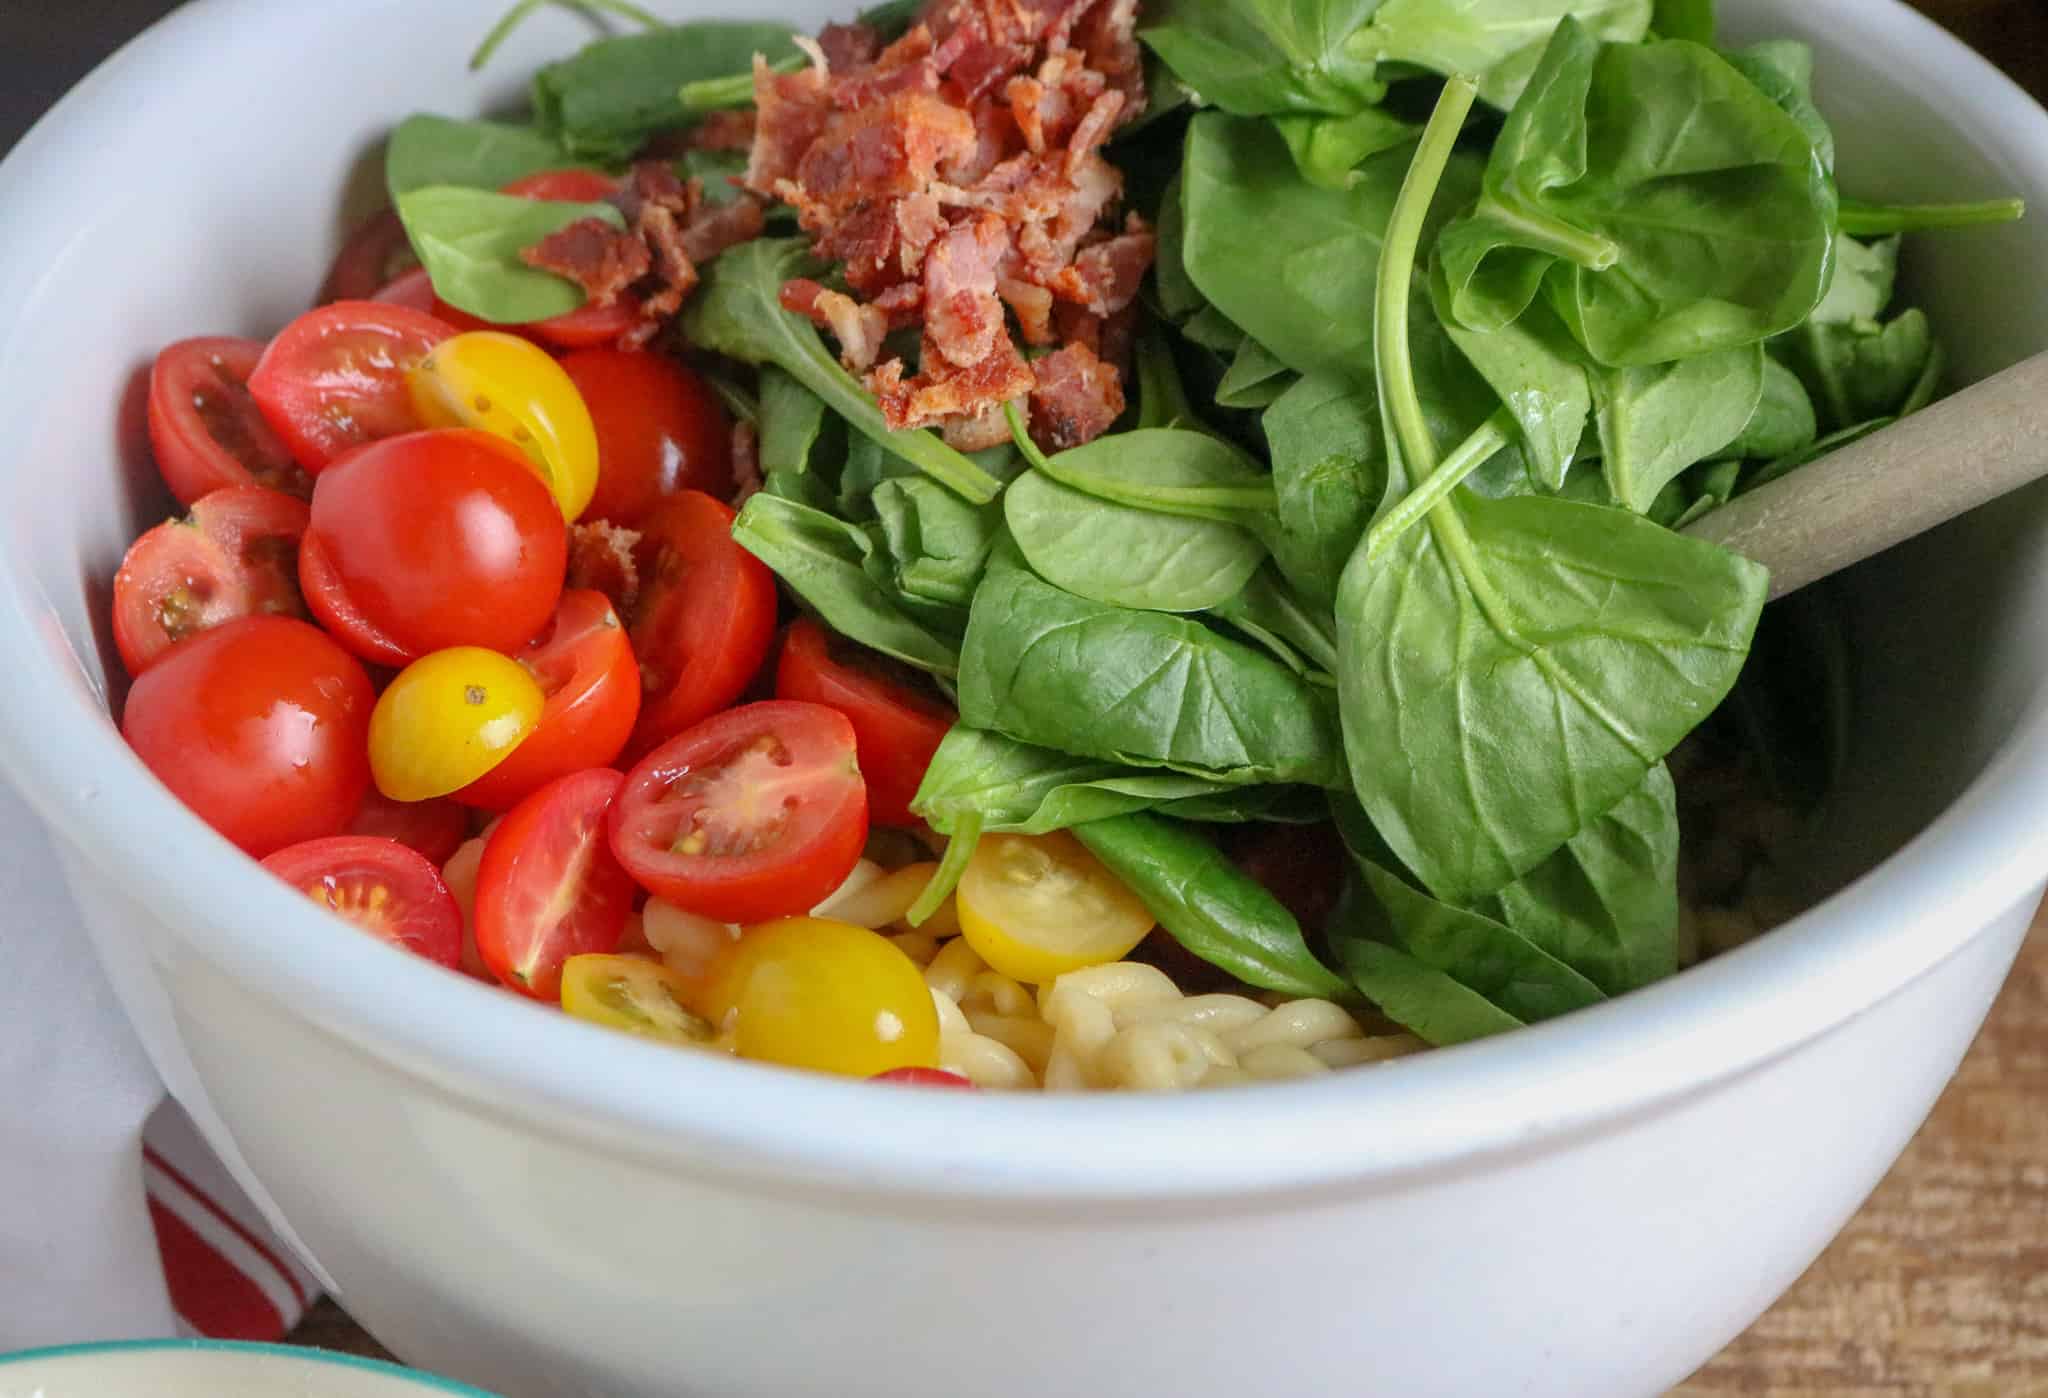 BLT Pasta Salad ingredients cherry tomatoes, spinach, bacon, yellow tomatoes and pasta in white ceramic bowl